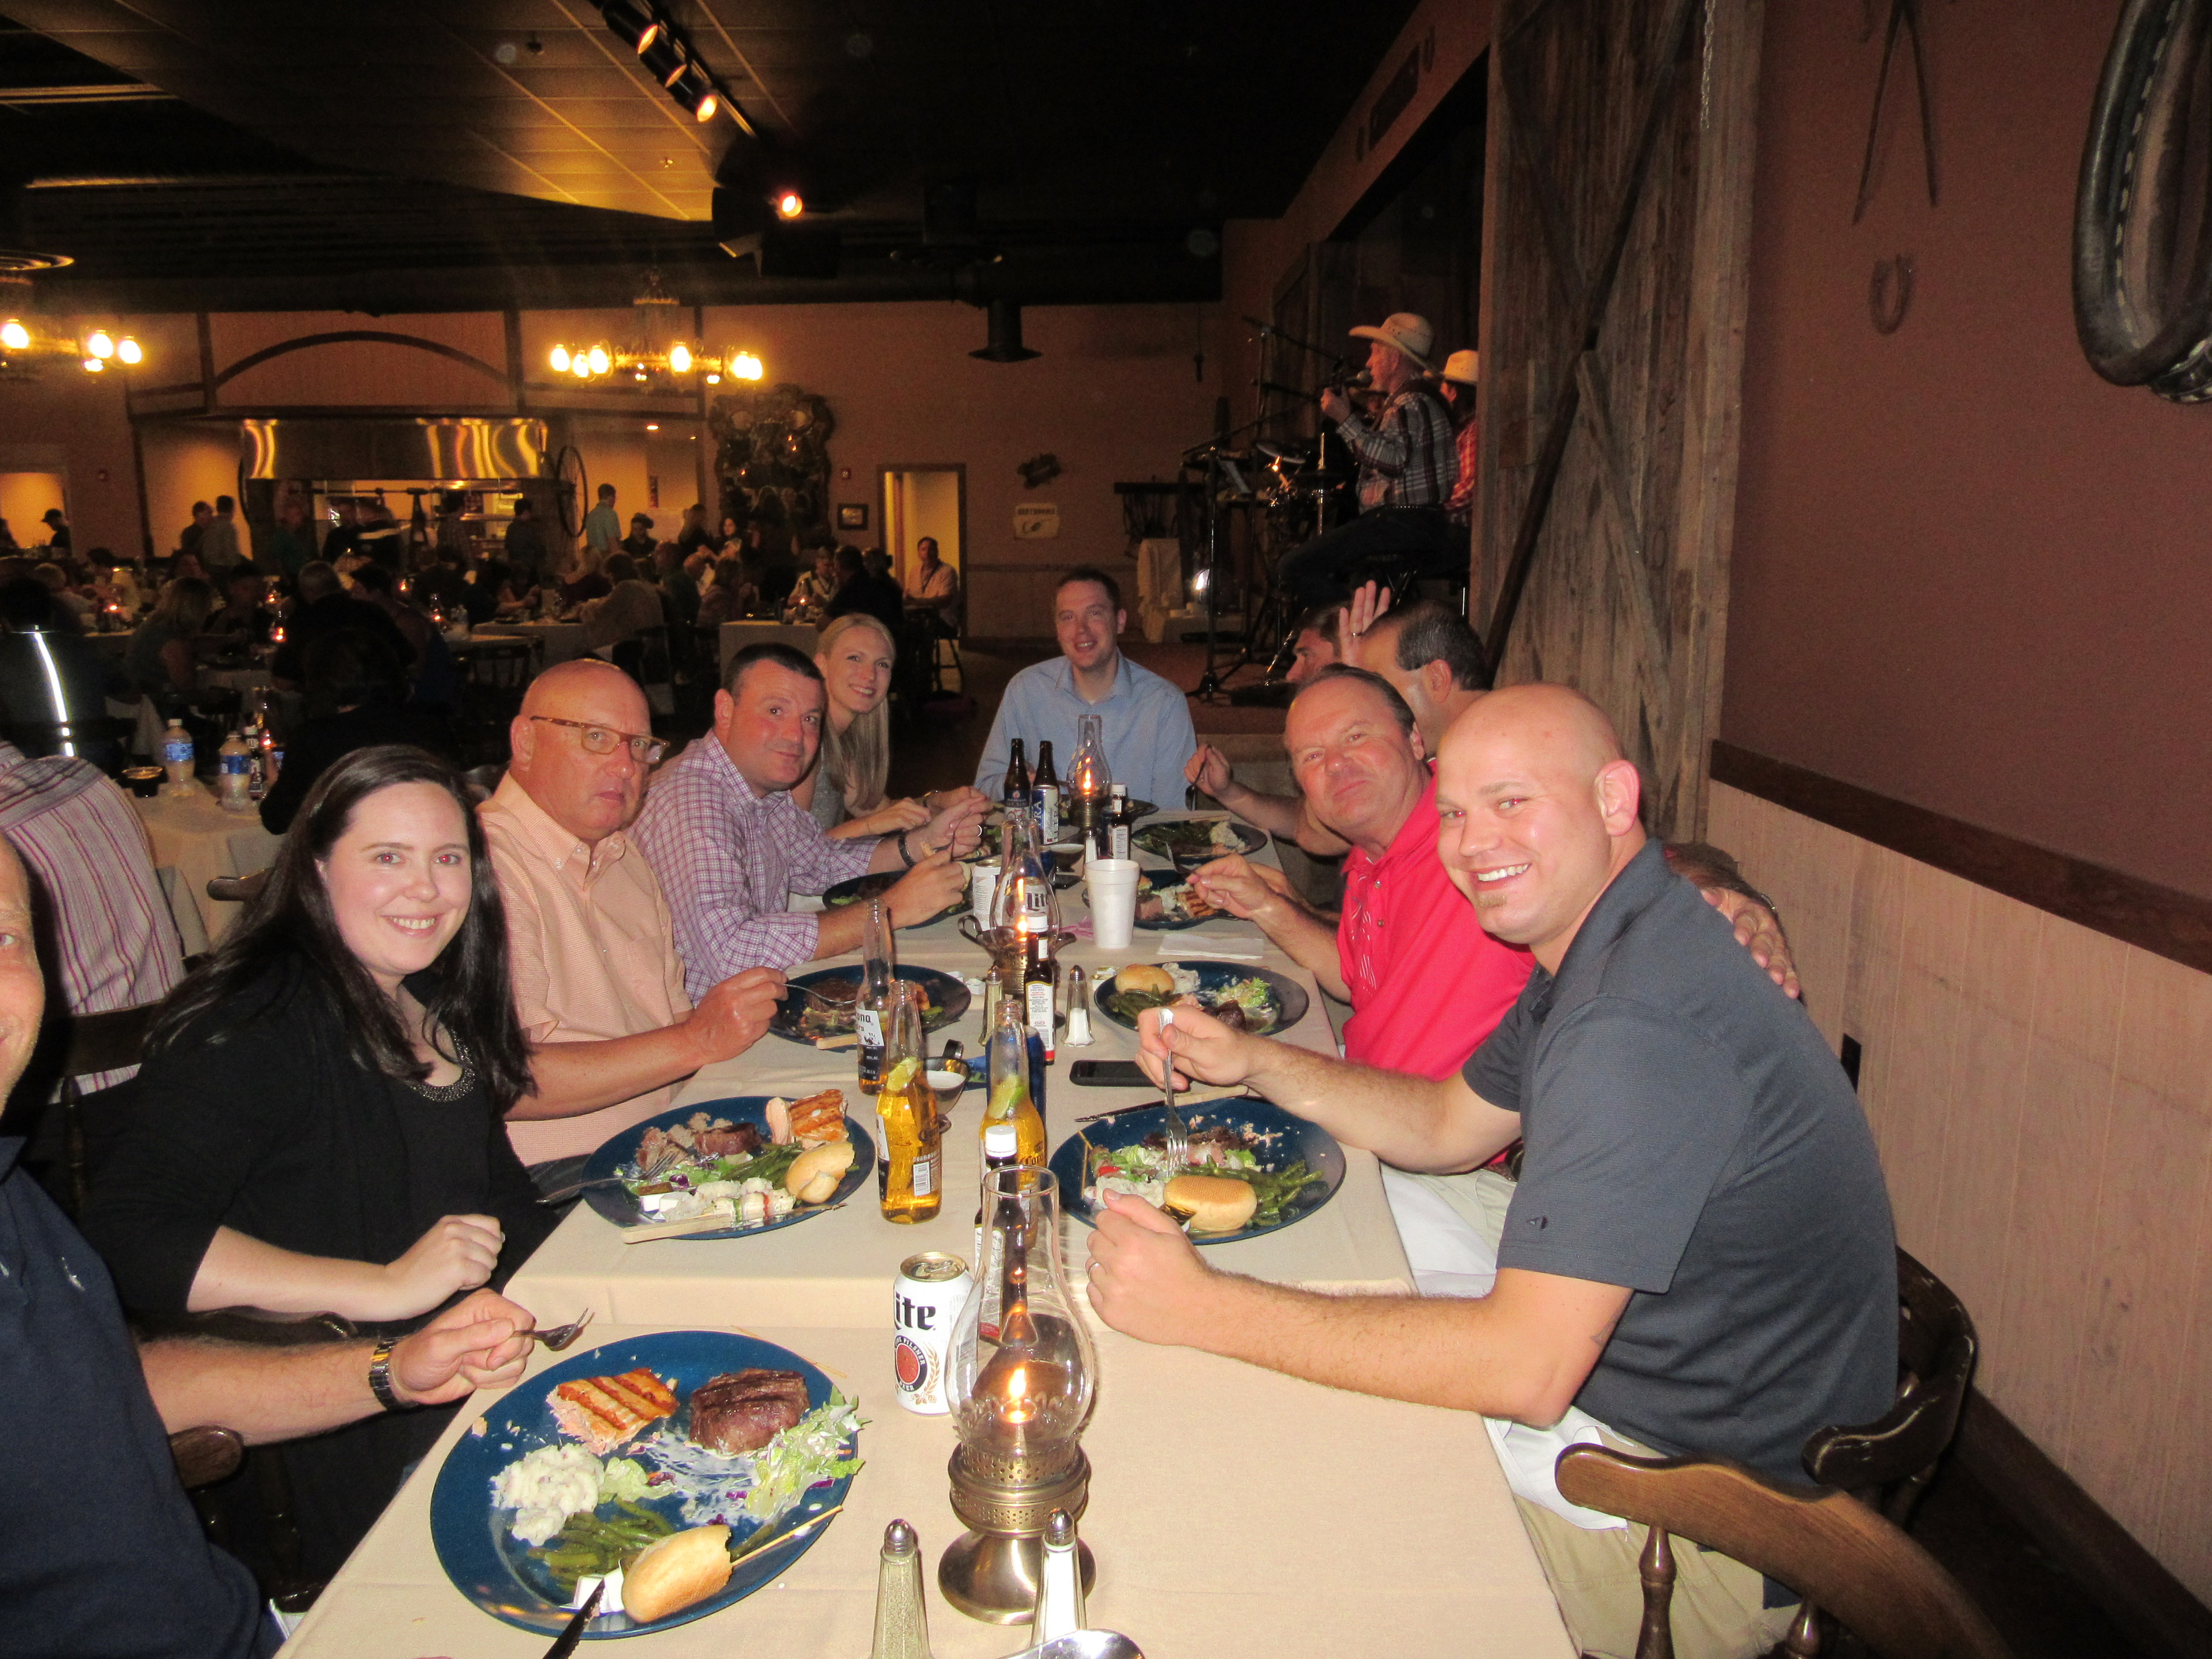 Event attendees enjoying an offsite dinner at the Rawhide Steakhouse.